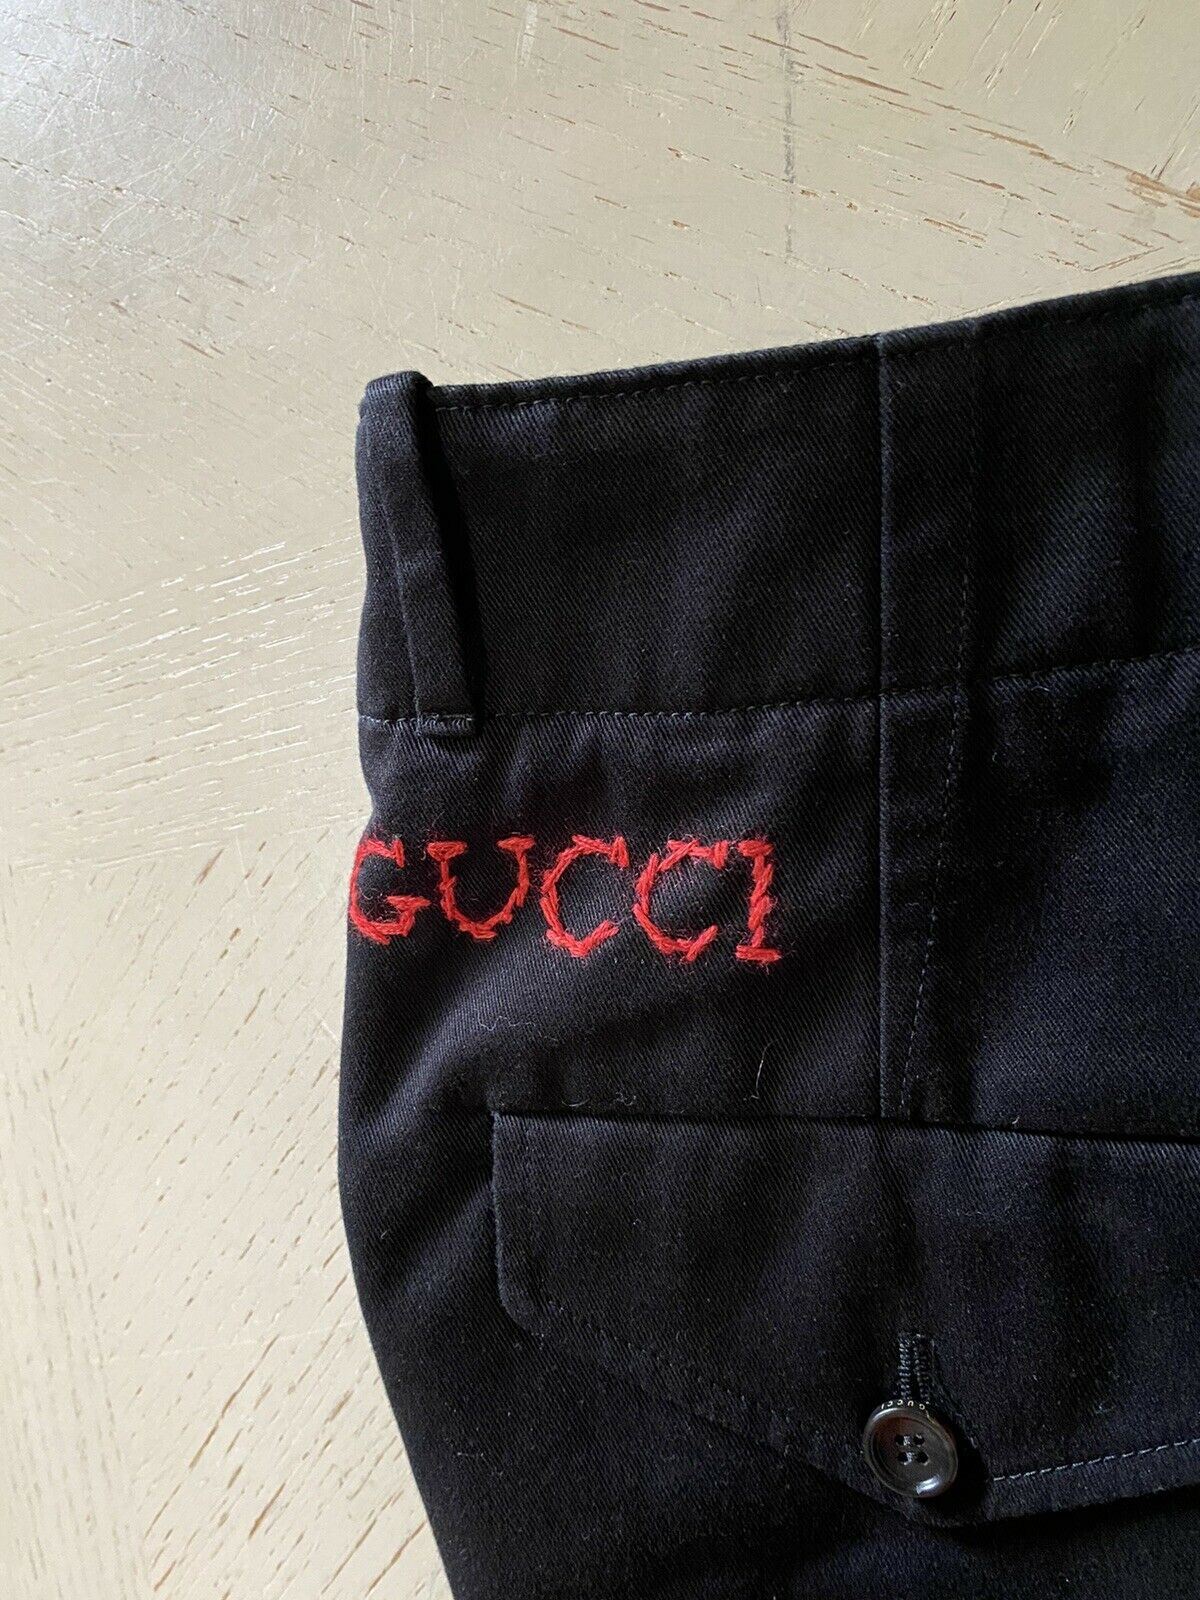 NWT Gucci Mens Military Cotton Short Pants Black Size 32 US Italy